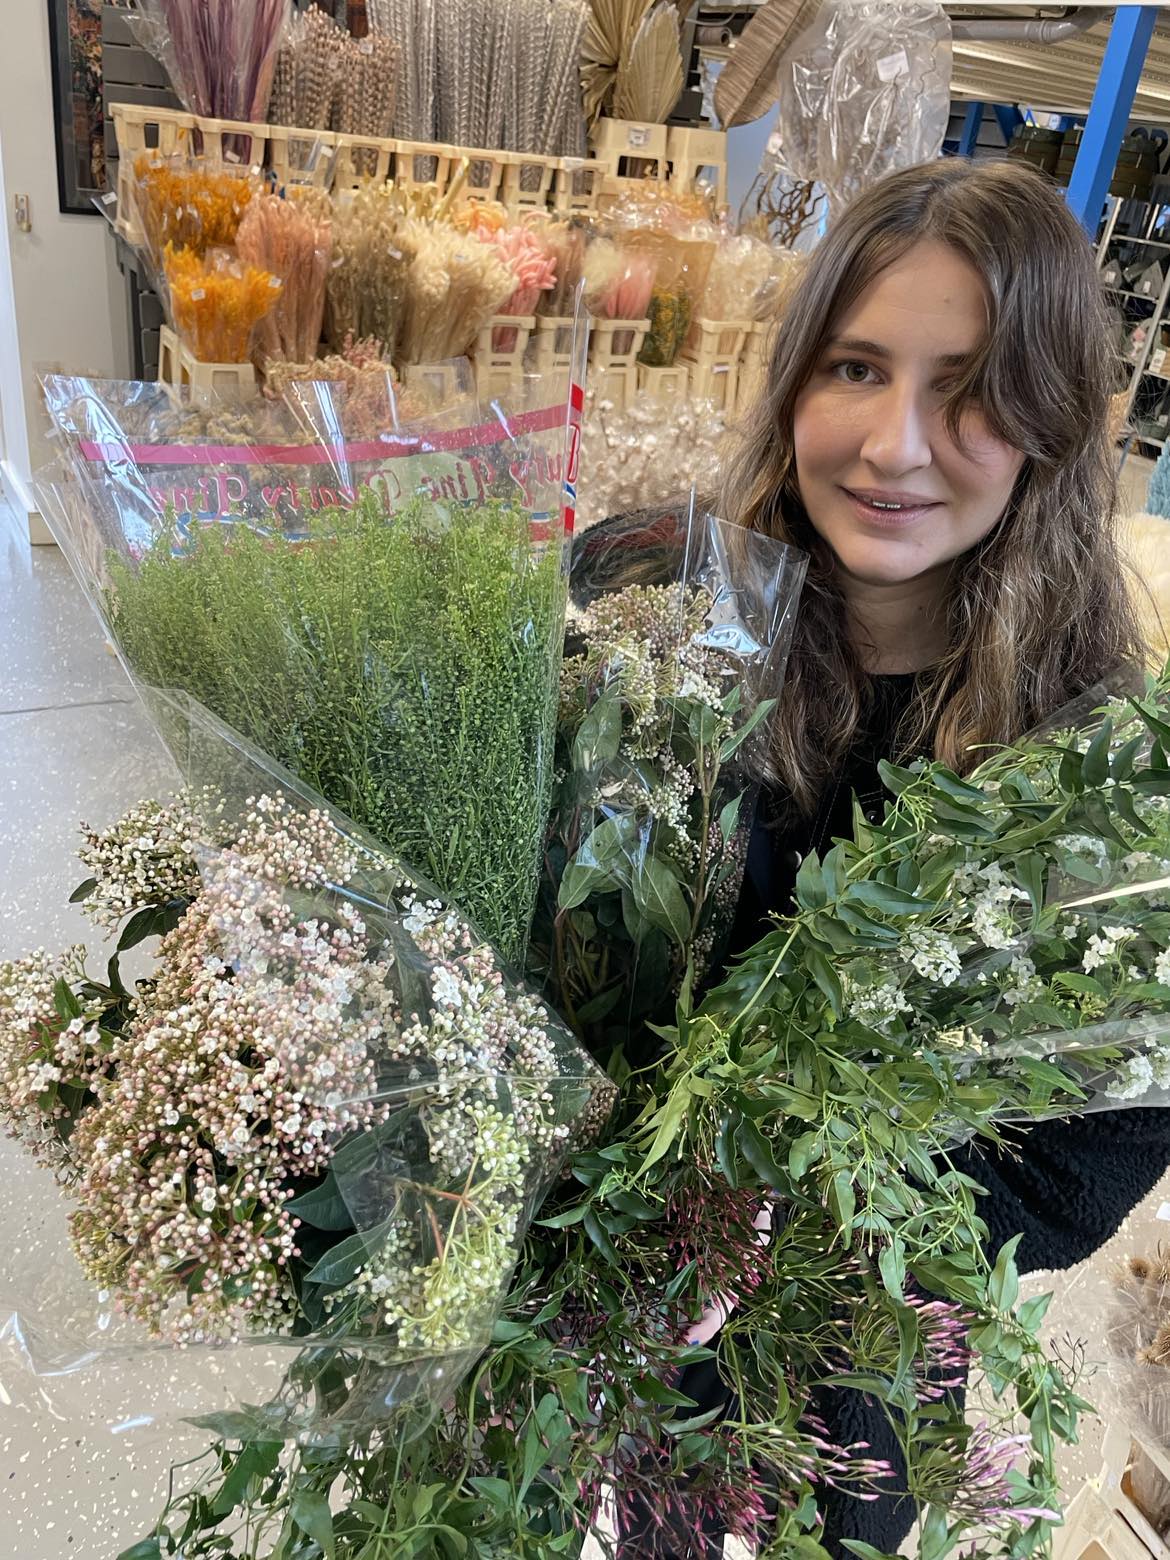 Image of Hind Aloul at a floral wholesale distributor